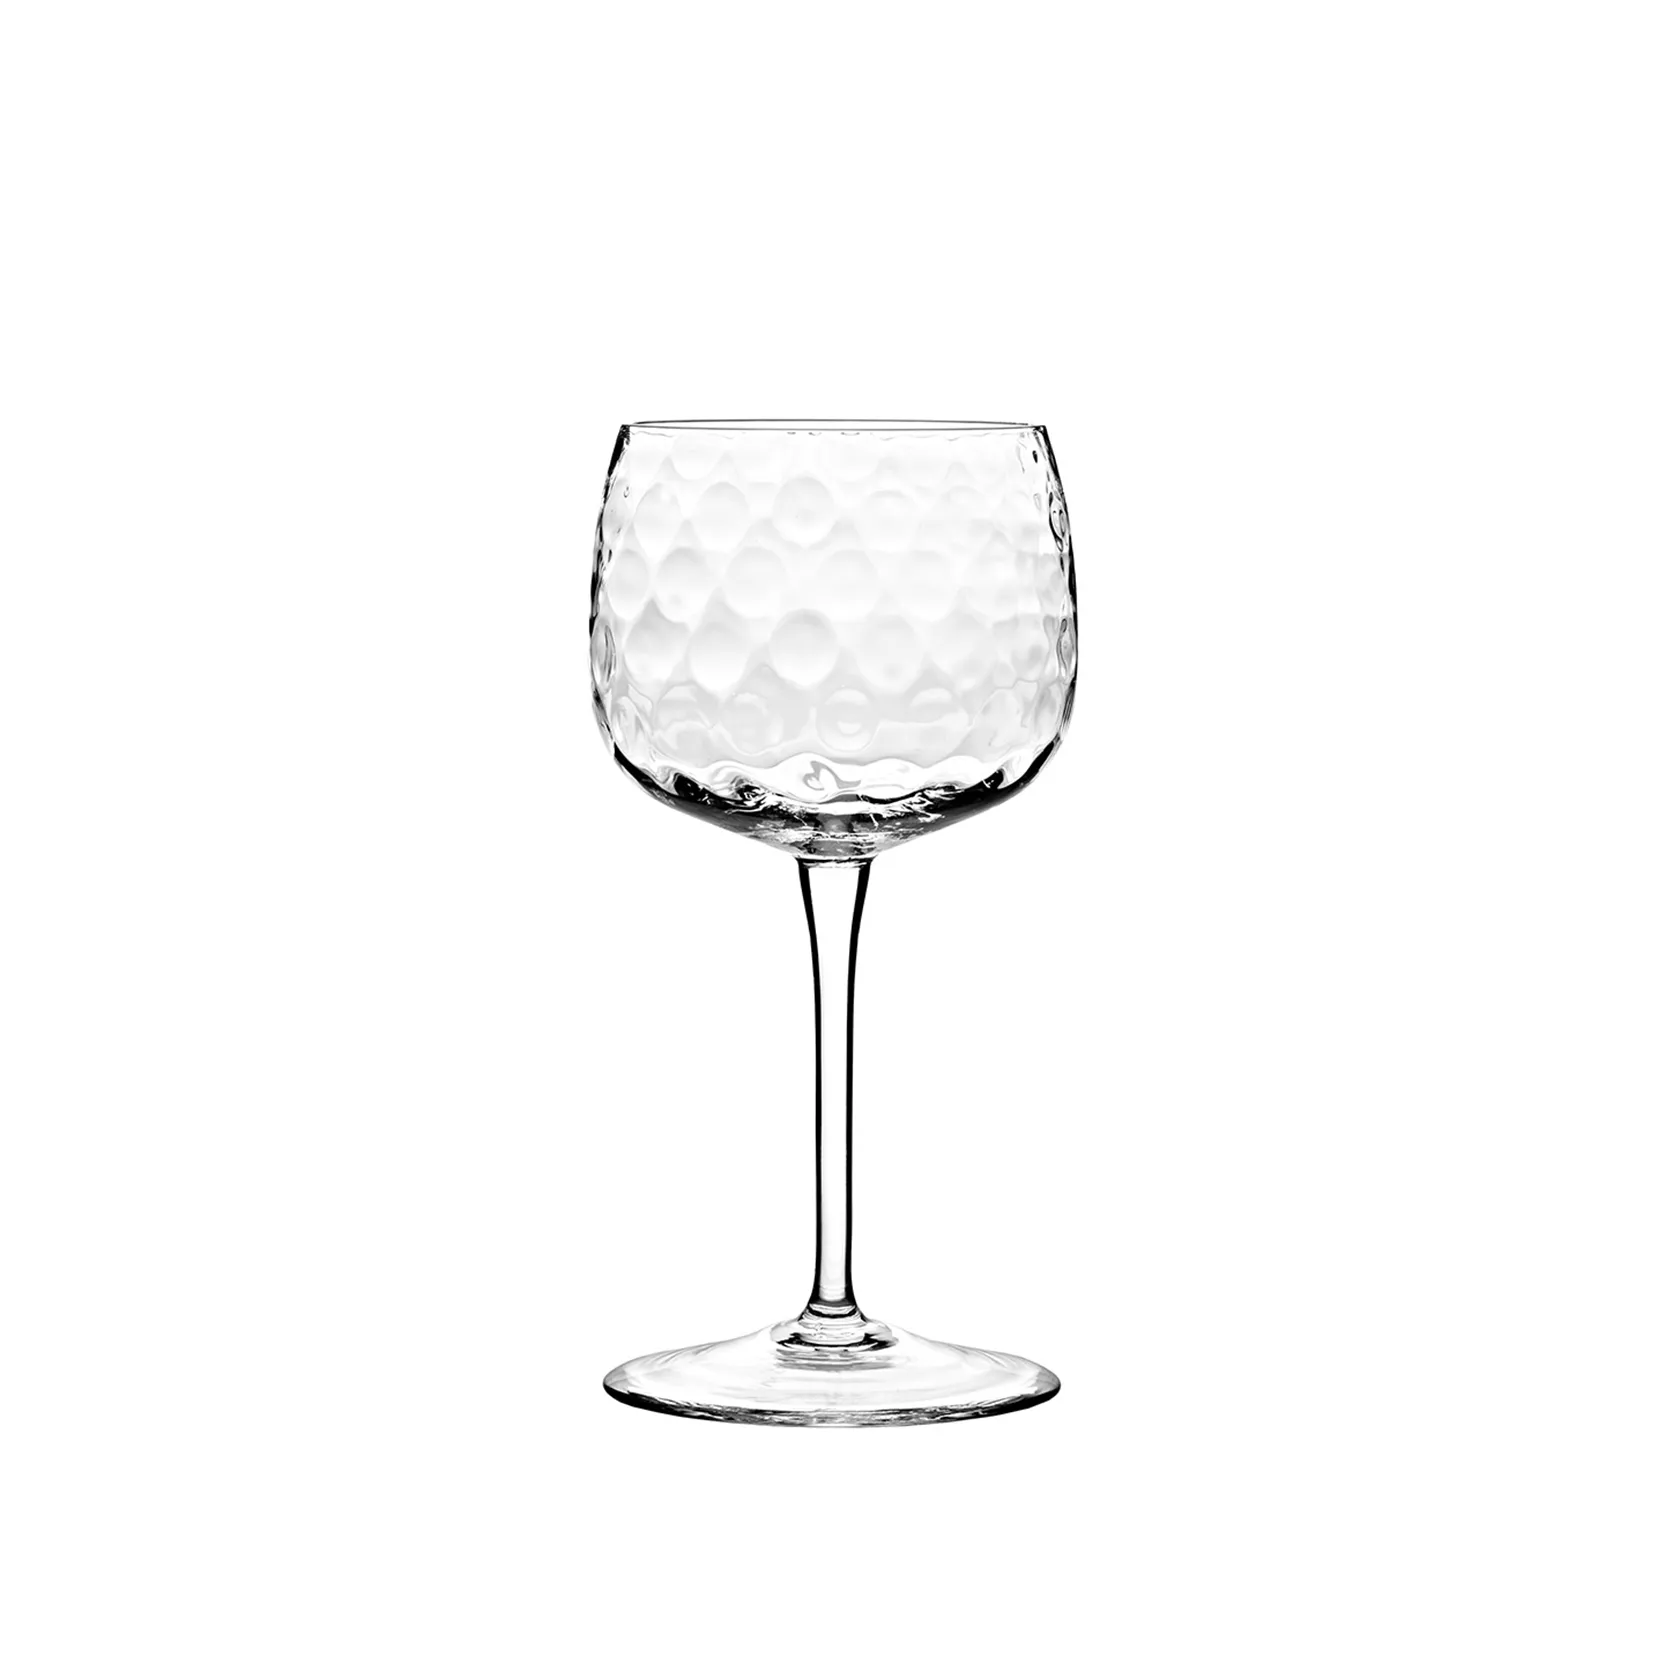 https://www.barthome.shop/84327-thickbox_default/set-of-6-goblets-covo-bei.jpg